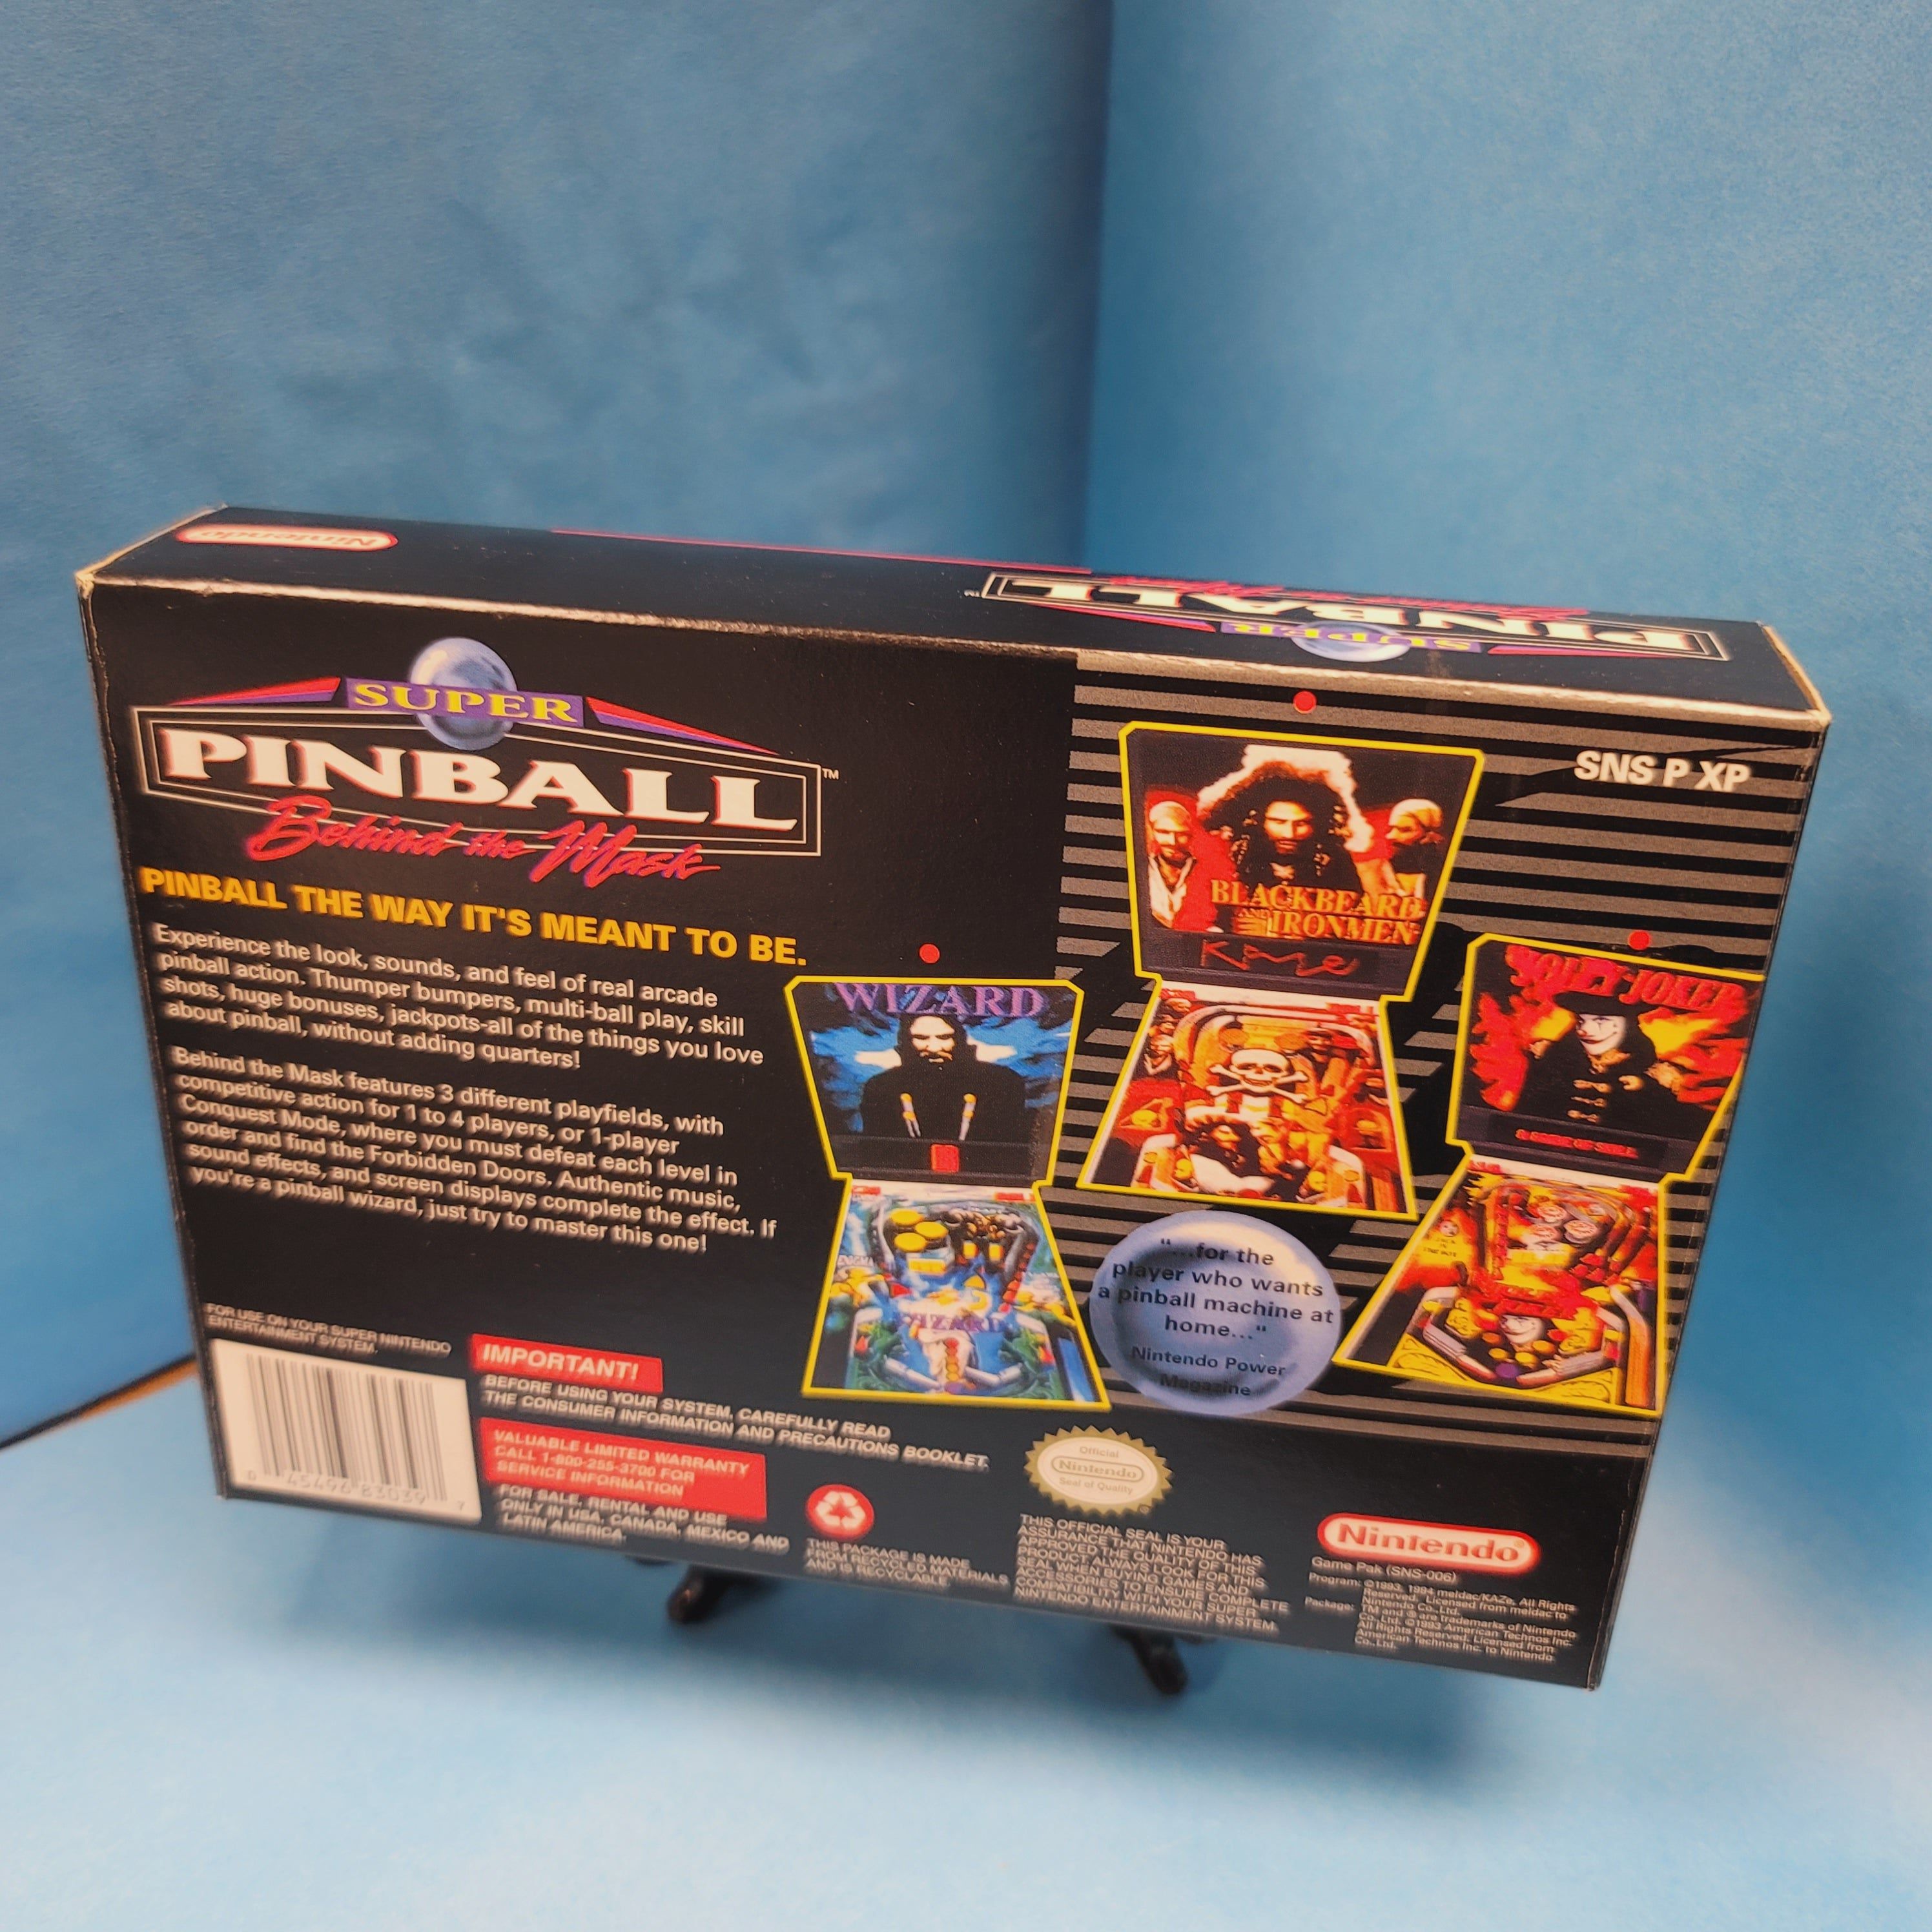 SNES - Super Pinball Behind the Mask (Complete in Box / A+ / With Manual)